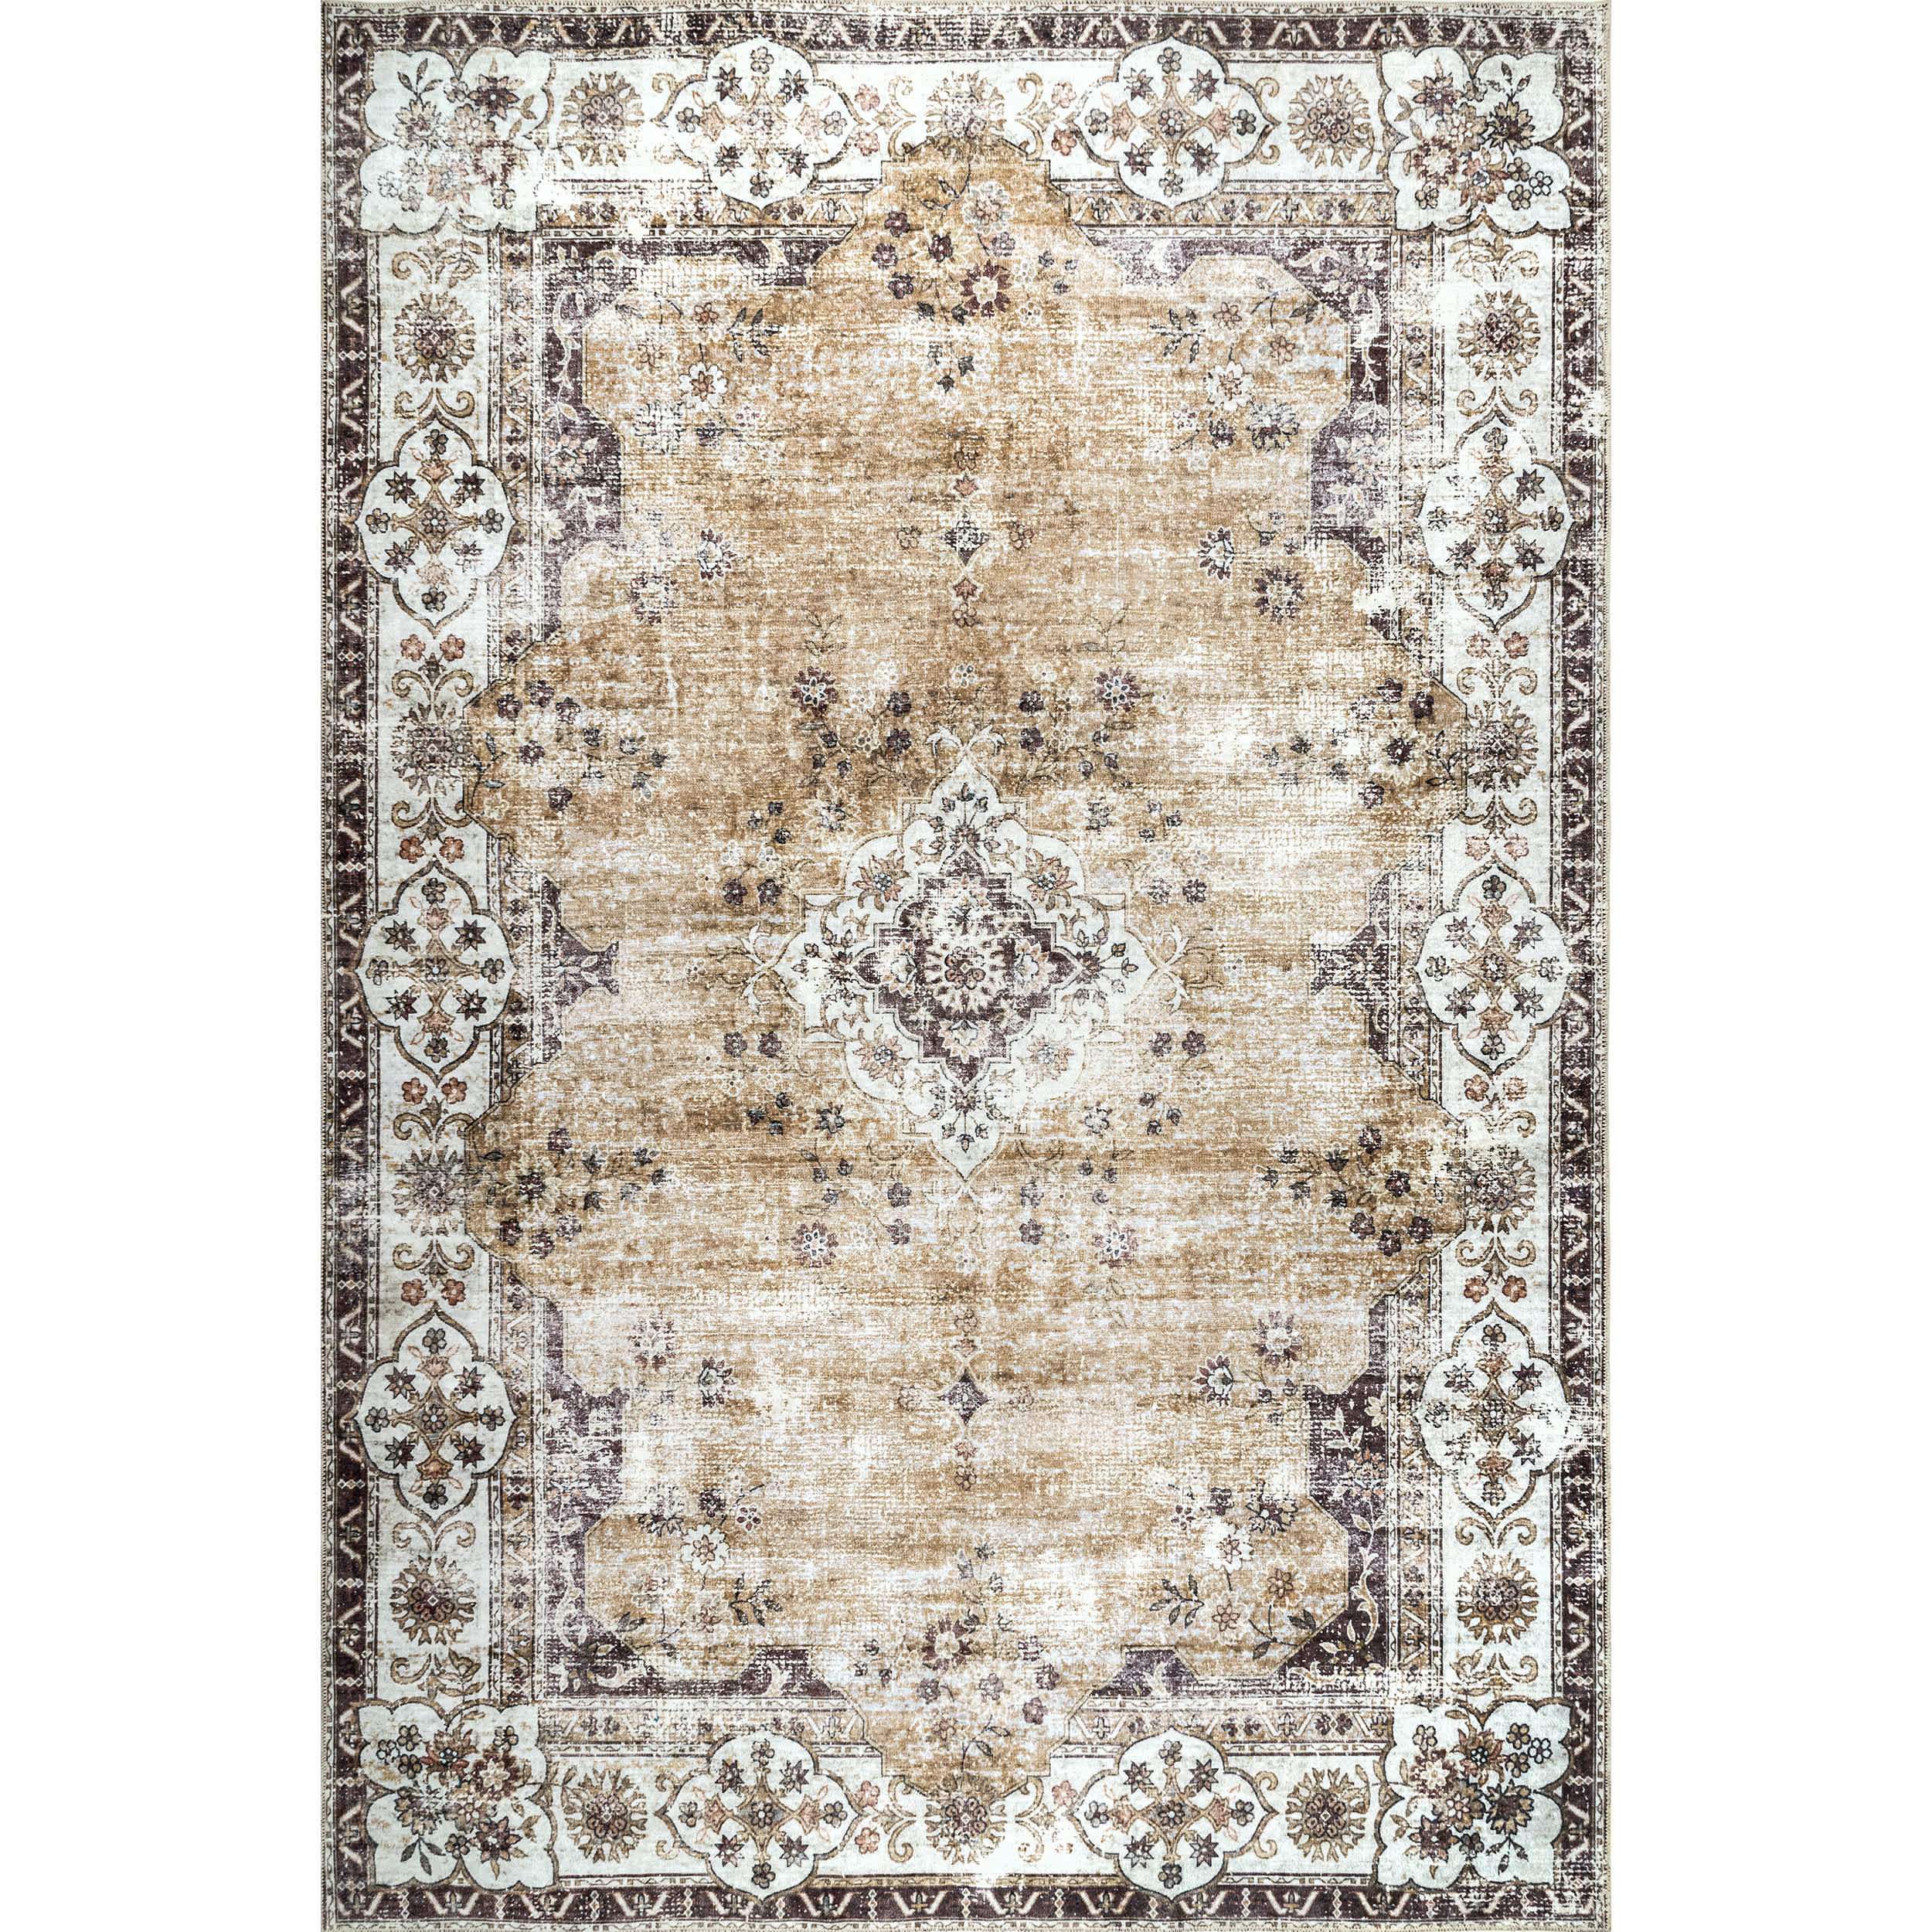 Ahgly Company Machine Washable Indoor Rectangle Transitional Moccasin Beige  Area Rugs, 3' x 5